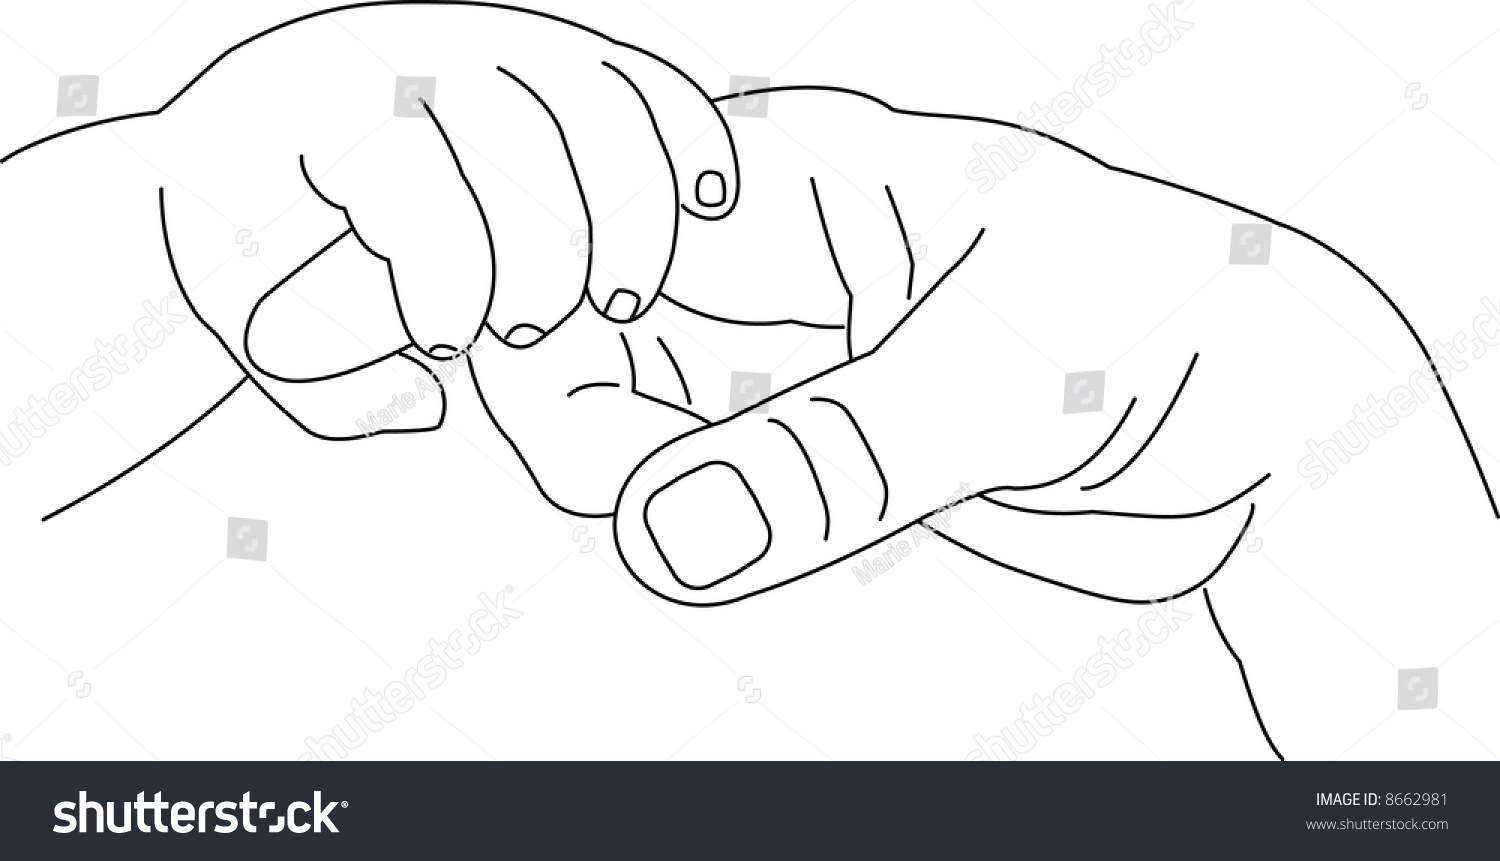 Download Image Child Holding His Fathers Hand Stock Vector 8662981 ...